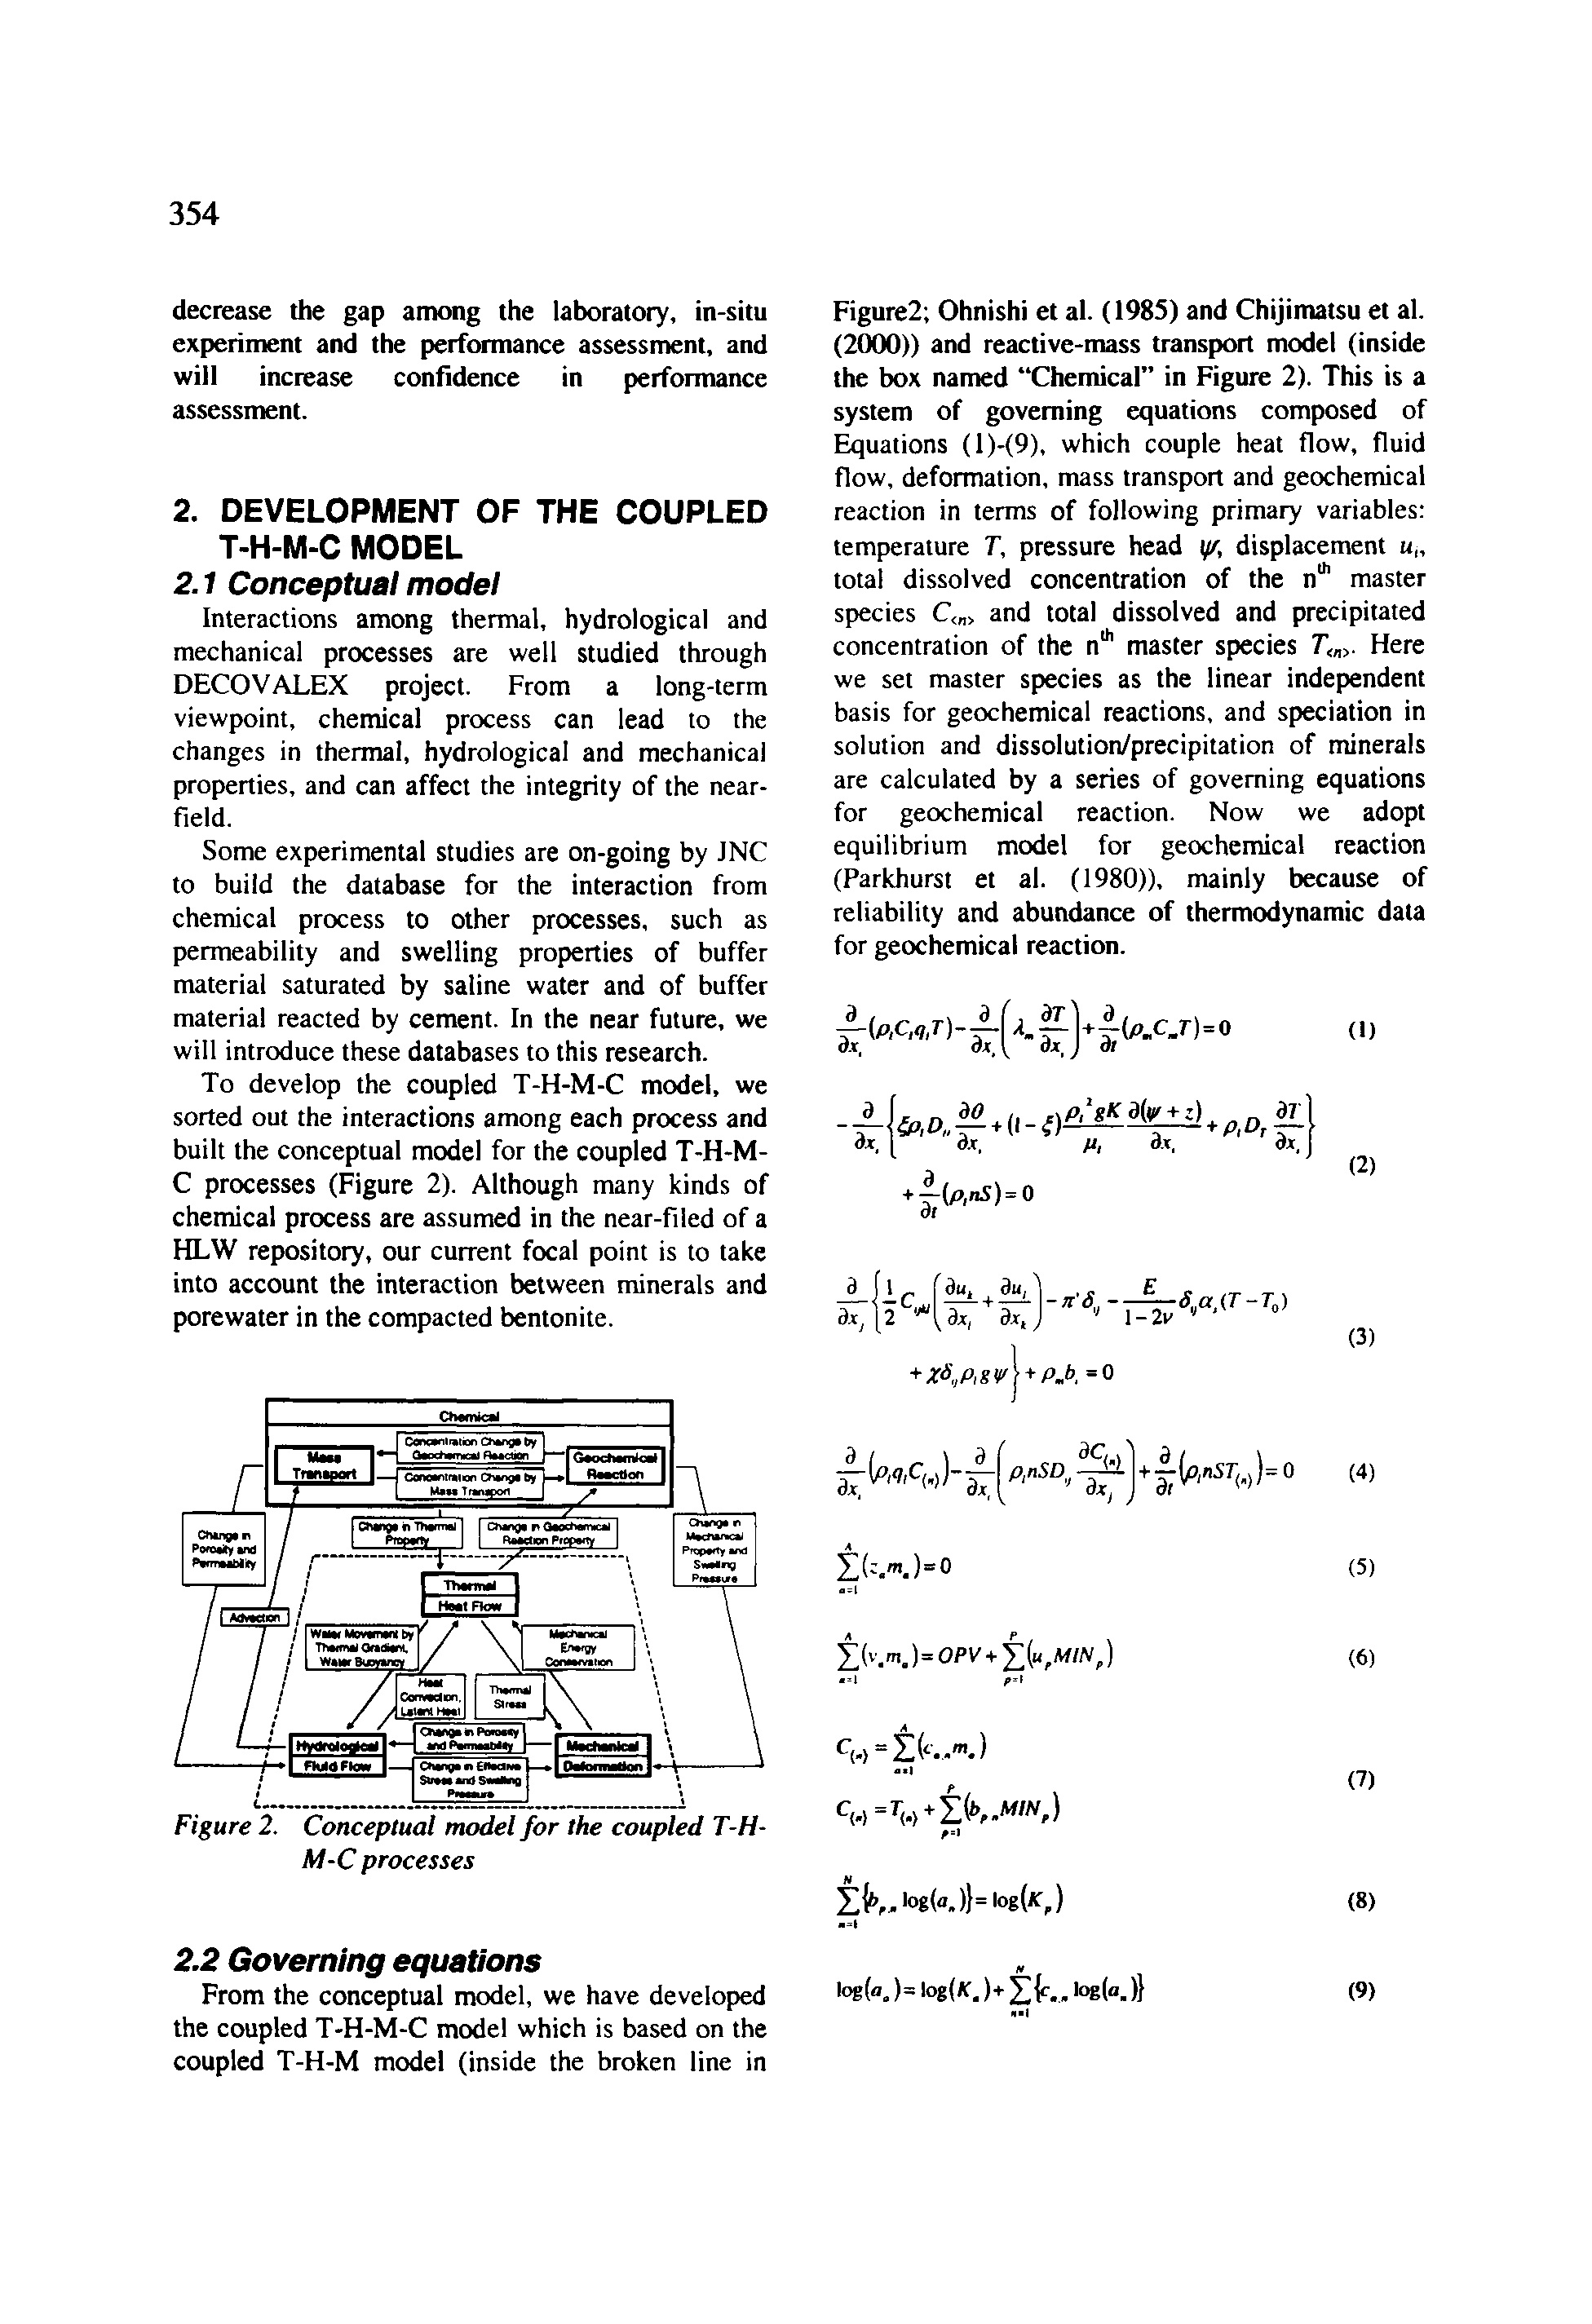 Figure2 Ohnishi et al. (1985) and Chijimatsu et al. (2000)) and reactive-mass transport model (inside the box named Chemical in Figure 2). This is a system of governing equations composed of Equations (l)-(9), which couple heat flow, fluid flow, deformation, mass transport and geochemical reaction in terms of following primary variables temperature T, pressure head y/, displacement u total dissolved concentration of the n master species C< > and total dissolved and precipitated concentration of the n" master species T,. Here we set master species as the linear independent basis for geochemical reactions, and speciation in solution and dissolution/precipitation of minerals are calculated by a series of governing equations for geochemical reaction. Now we adopt equilibrium model for geochemical reaction (Parkhurst et al. (1980)), mainly because of reliability and abundance of thermodynamic data for geochemical reaction.